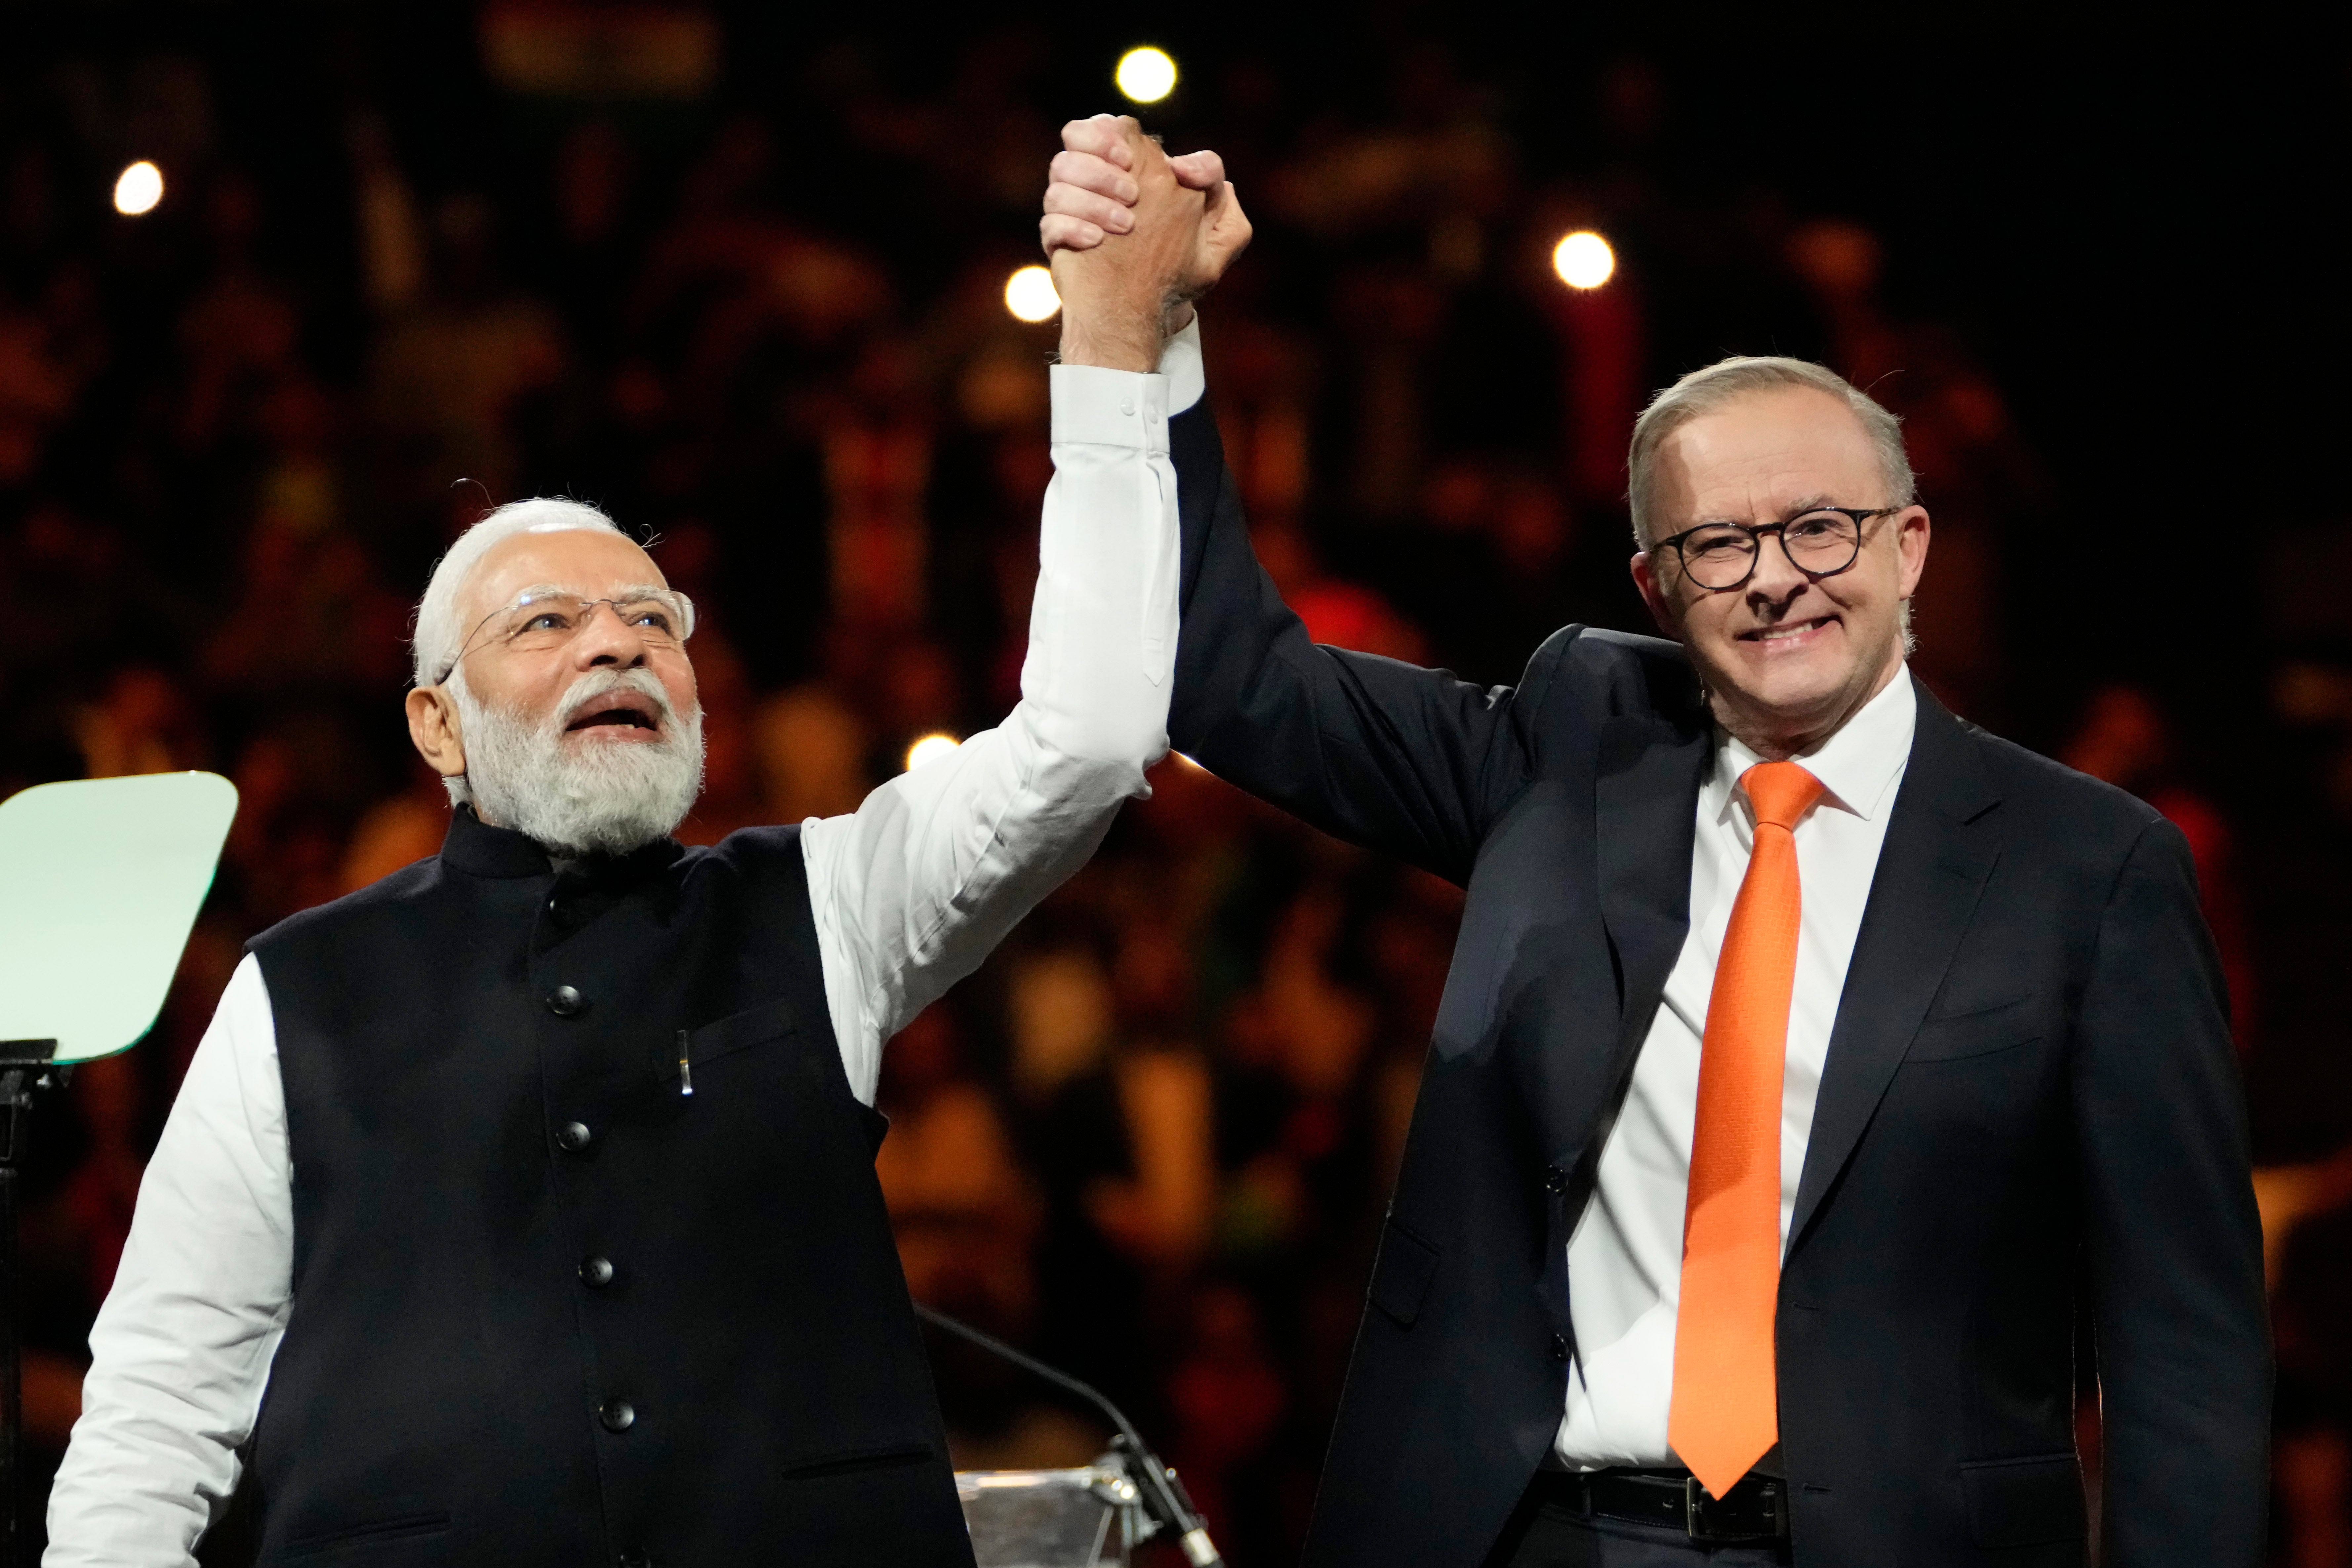 Indian Prime Minister Narendra Modi, left, holds hands with his Australian counterpart Anthony Albanese